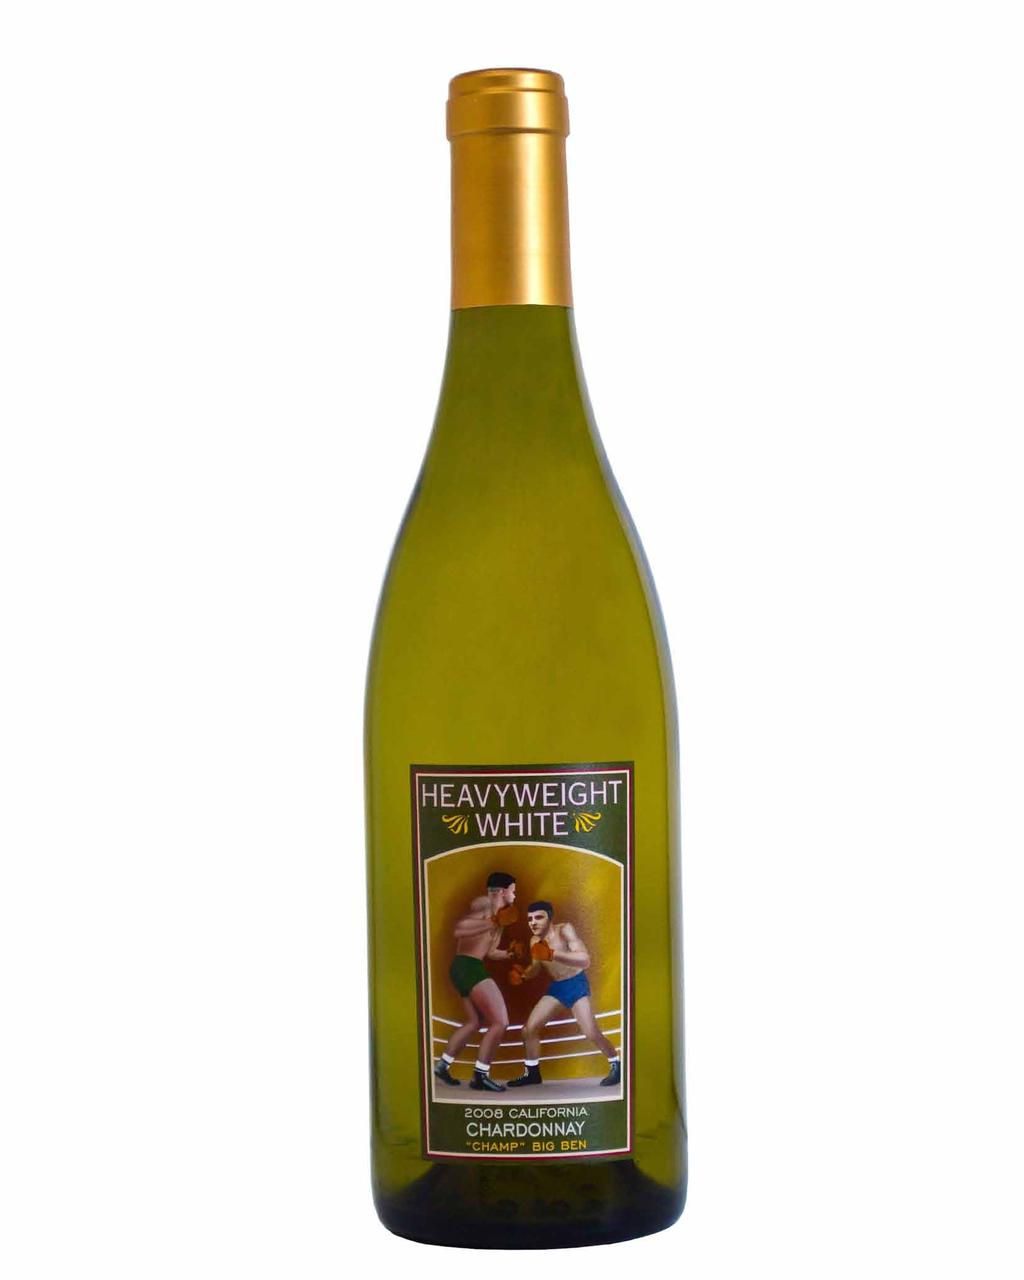 Heavyweight Heavyweight~ White Chardonnay Blend If you want a new Champion in your corner, take a sip or two of this rich, full bodied Chardonnay.